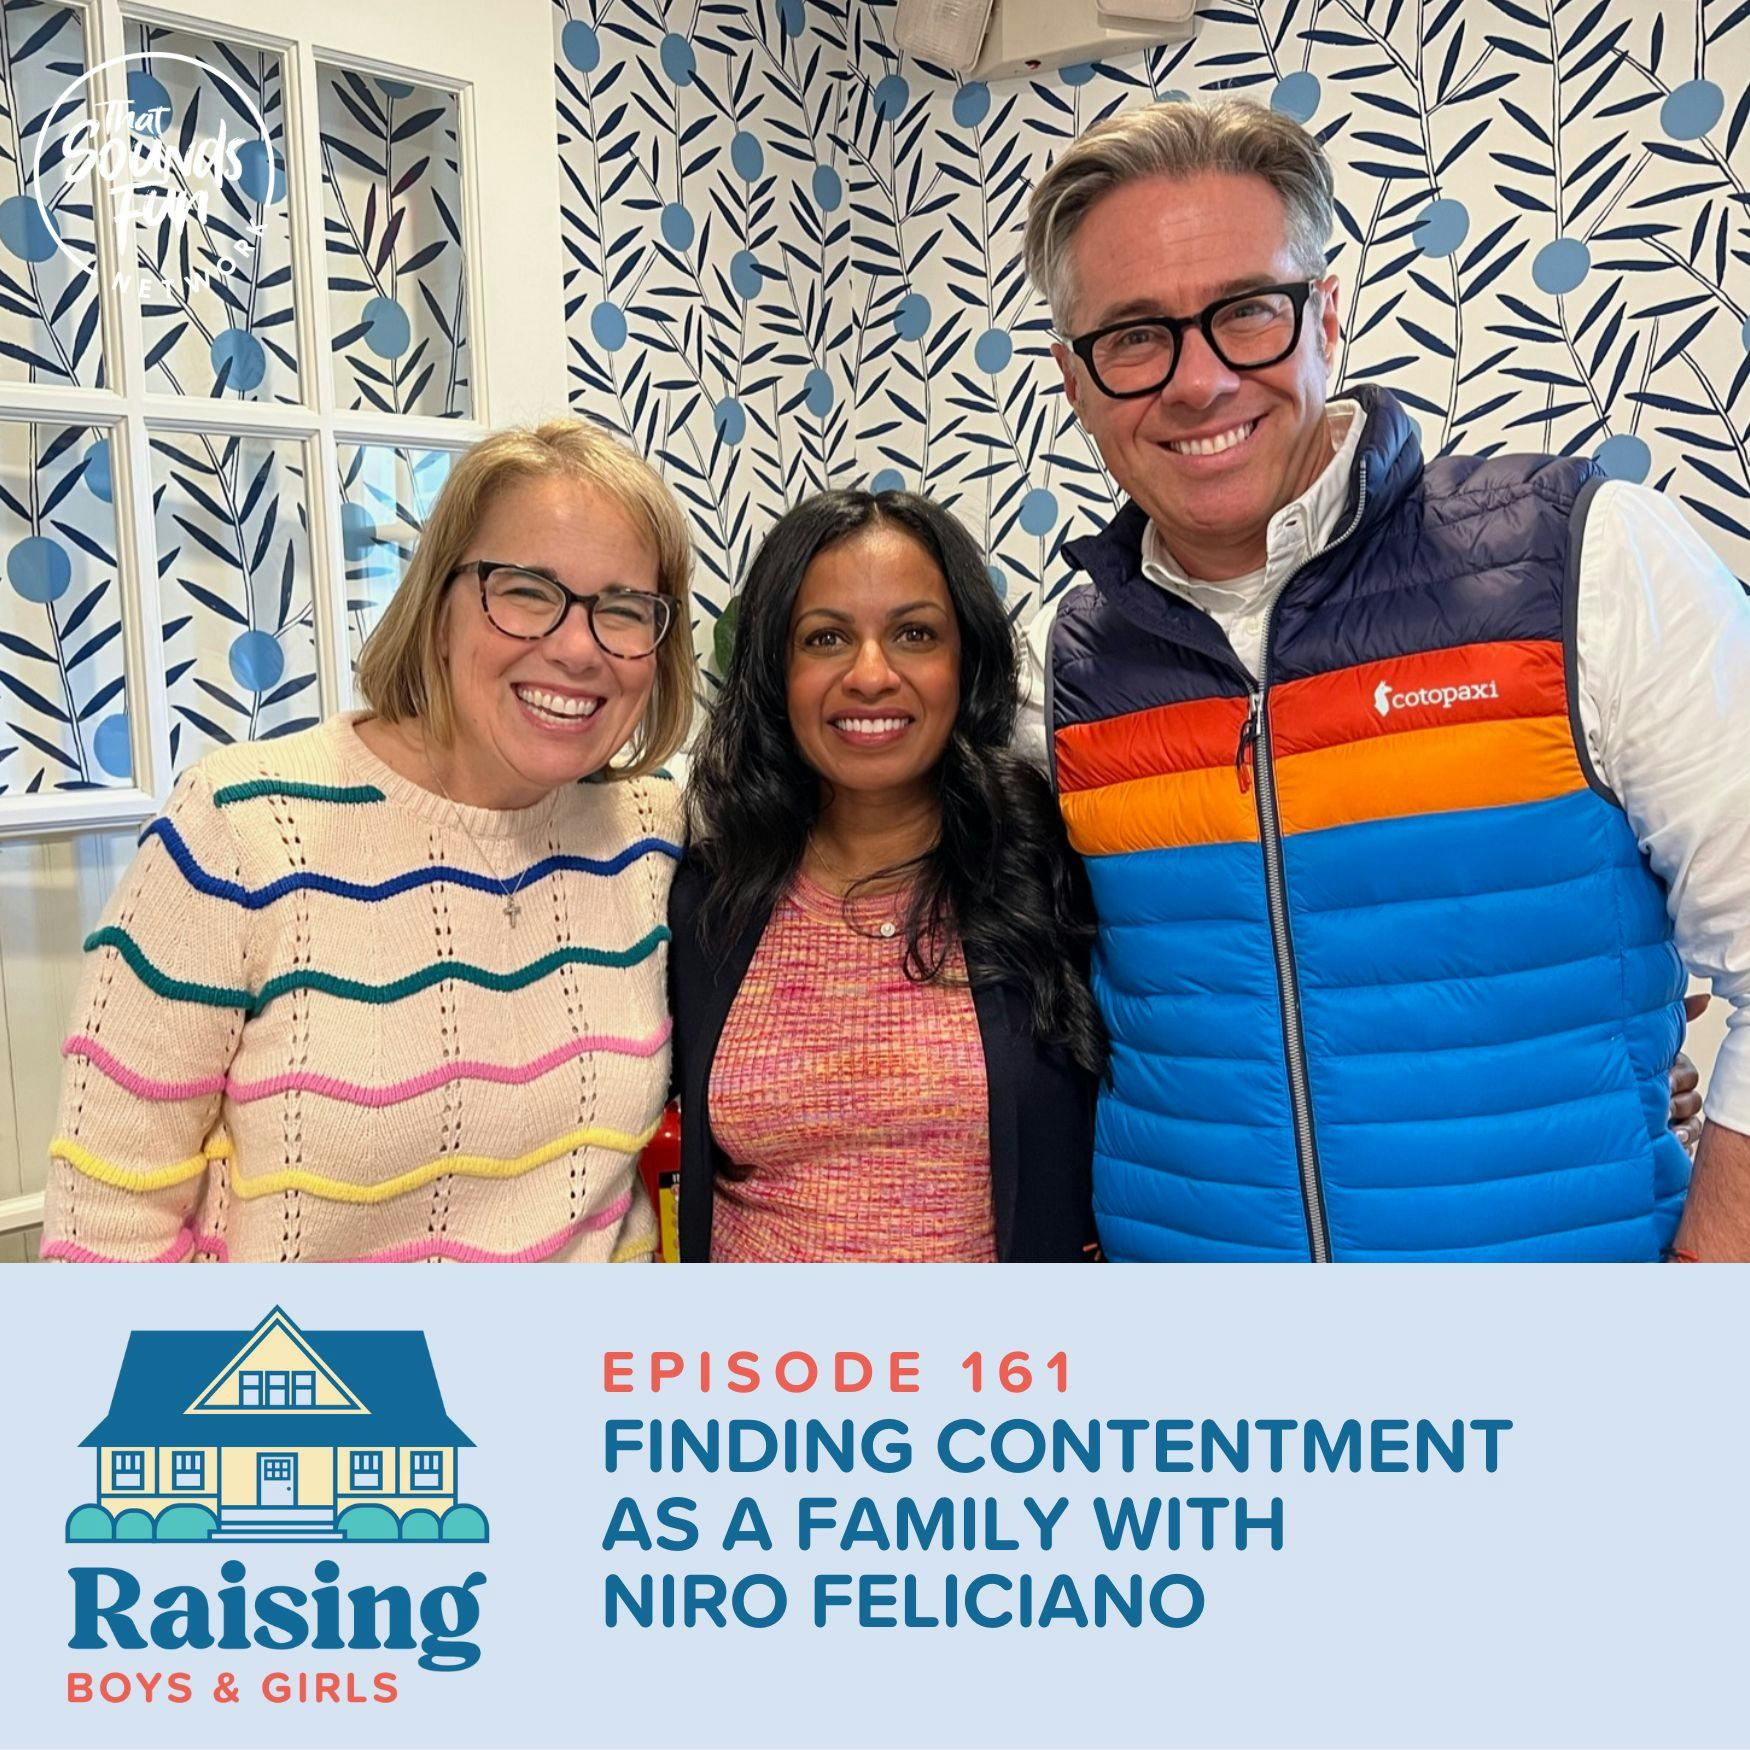 Episode 161: Finding Contentment as a Family with Niro Feliciano